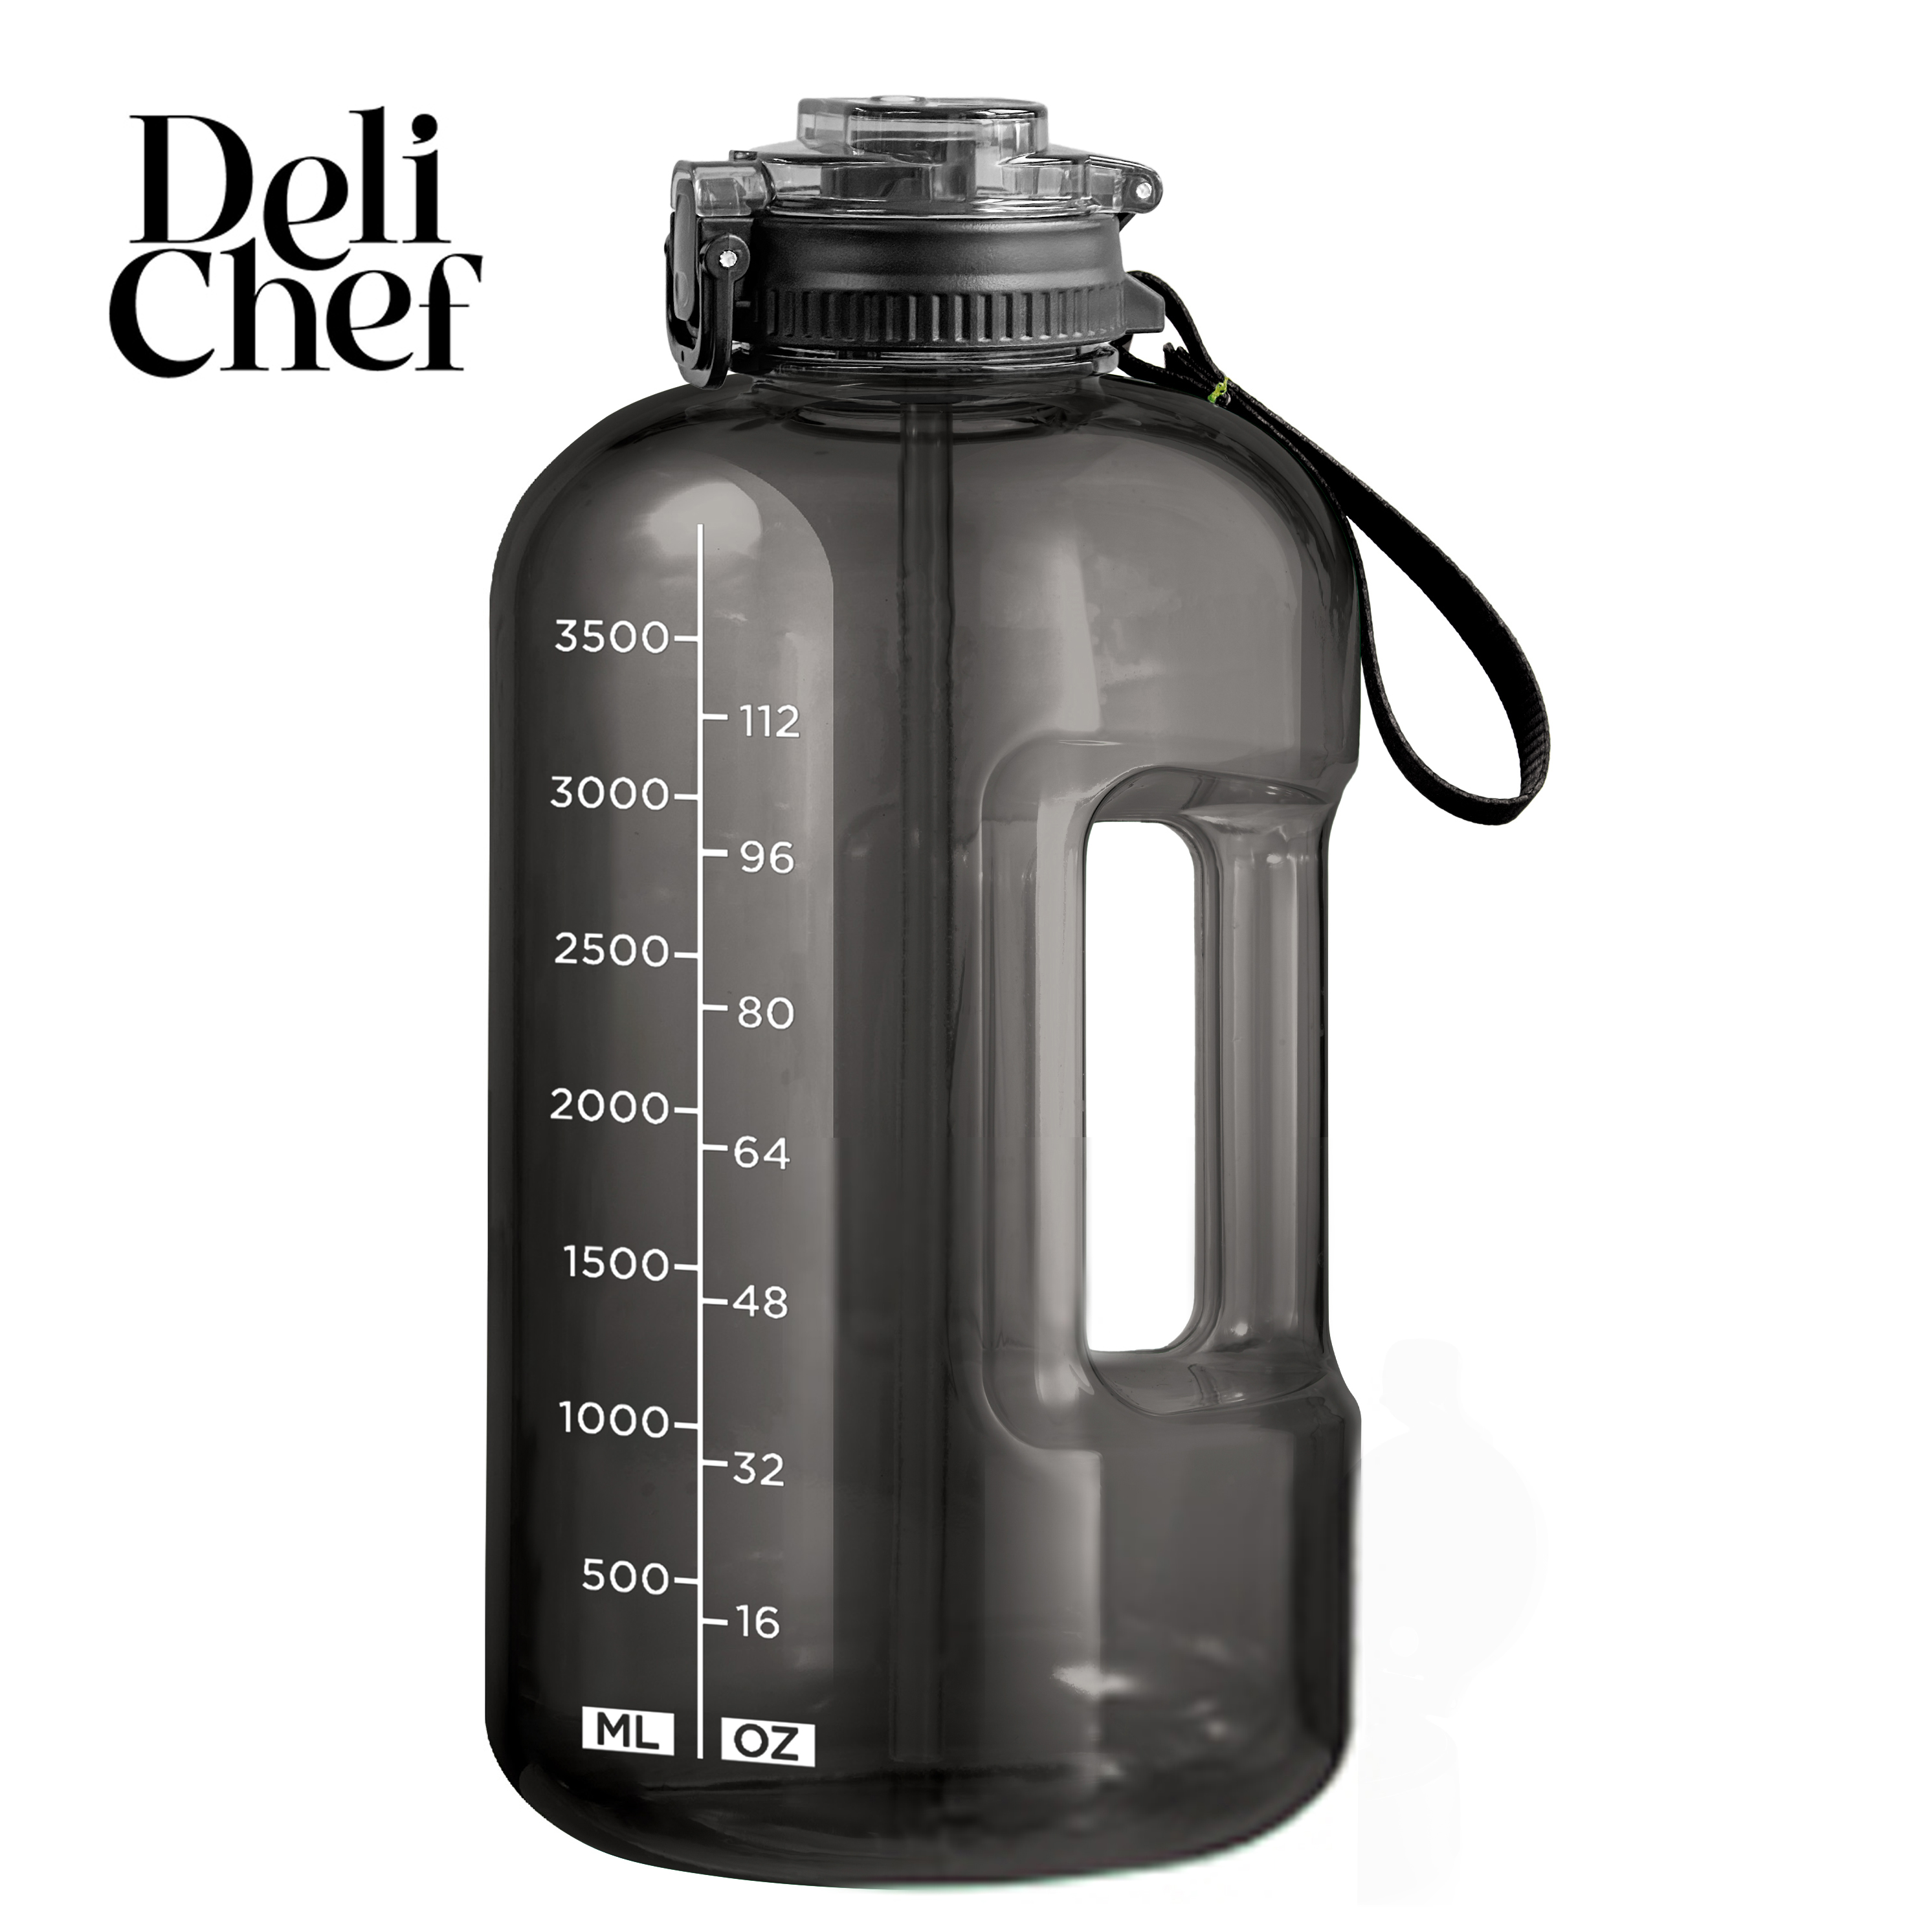 Large Capacity Handle Water Bottle, Portable Leakproof Clear Water